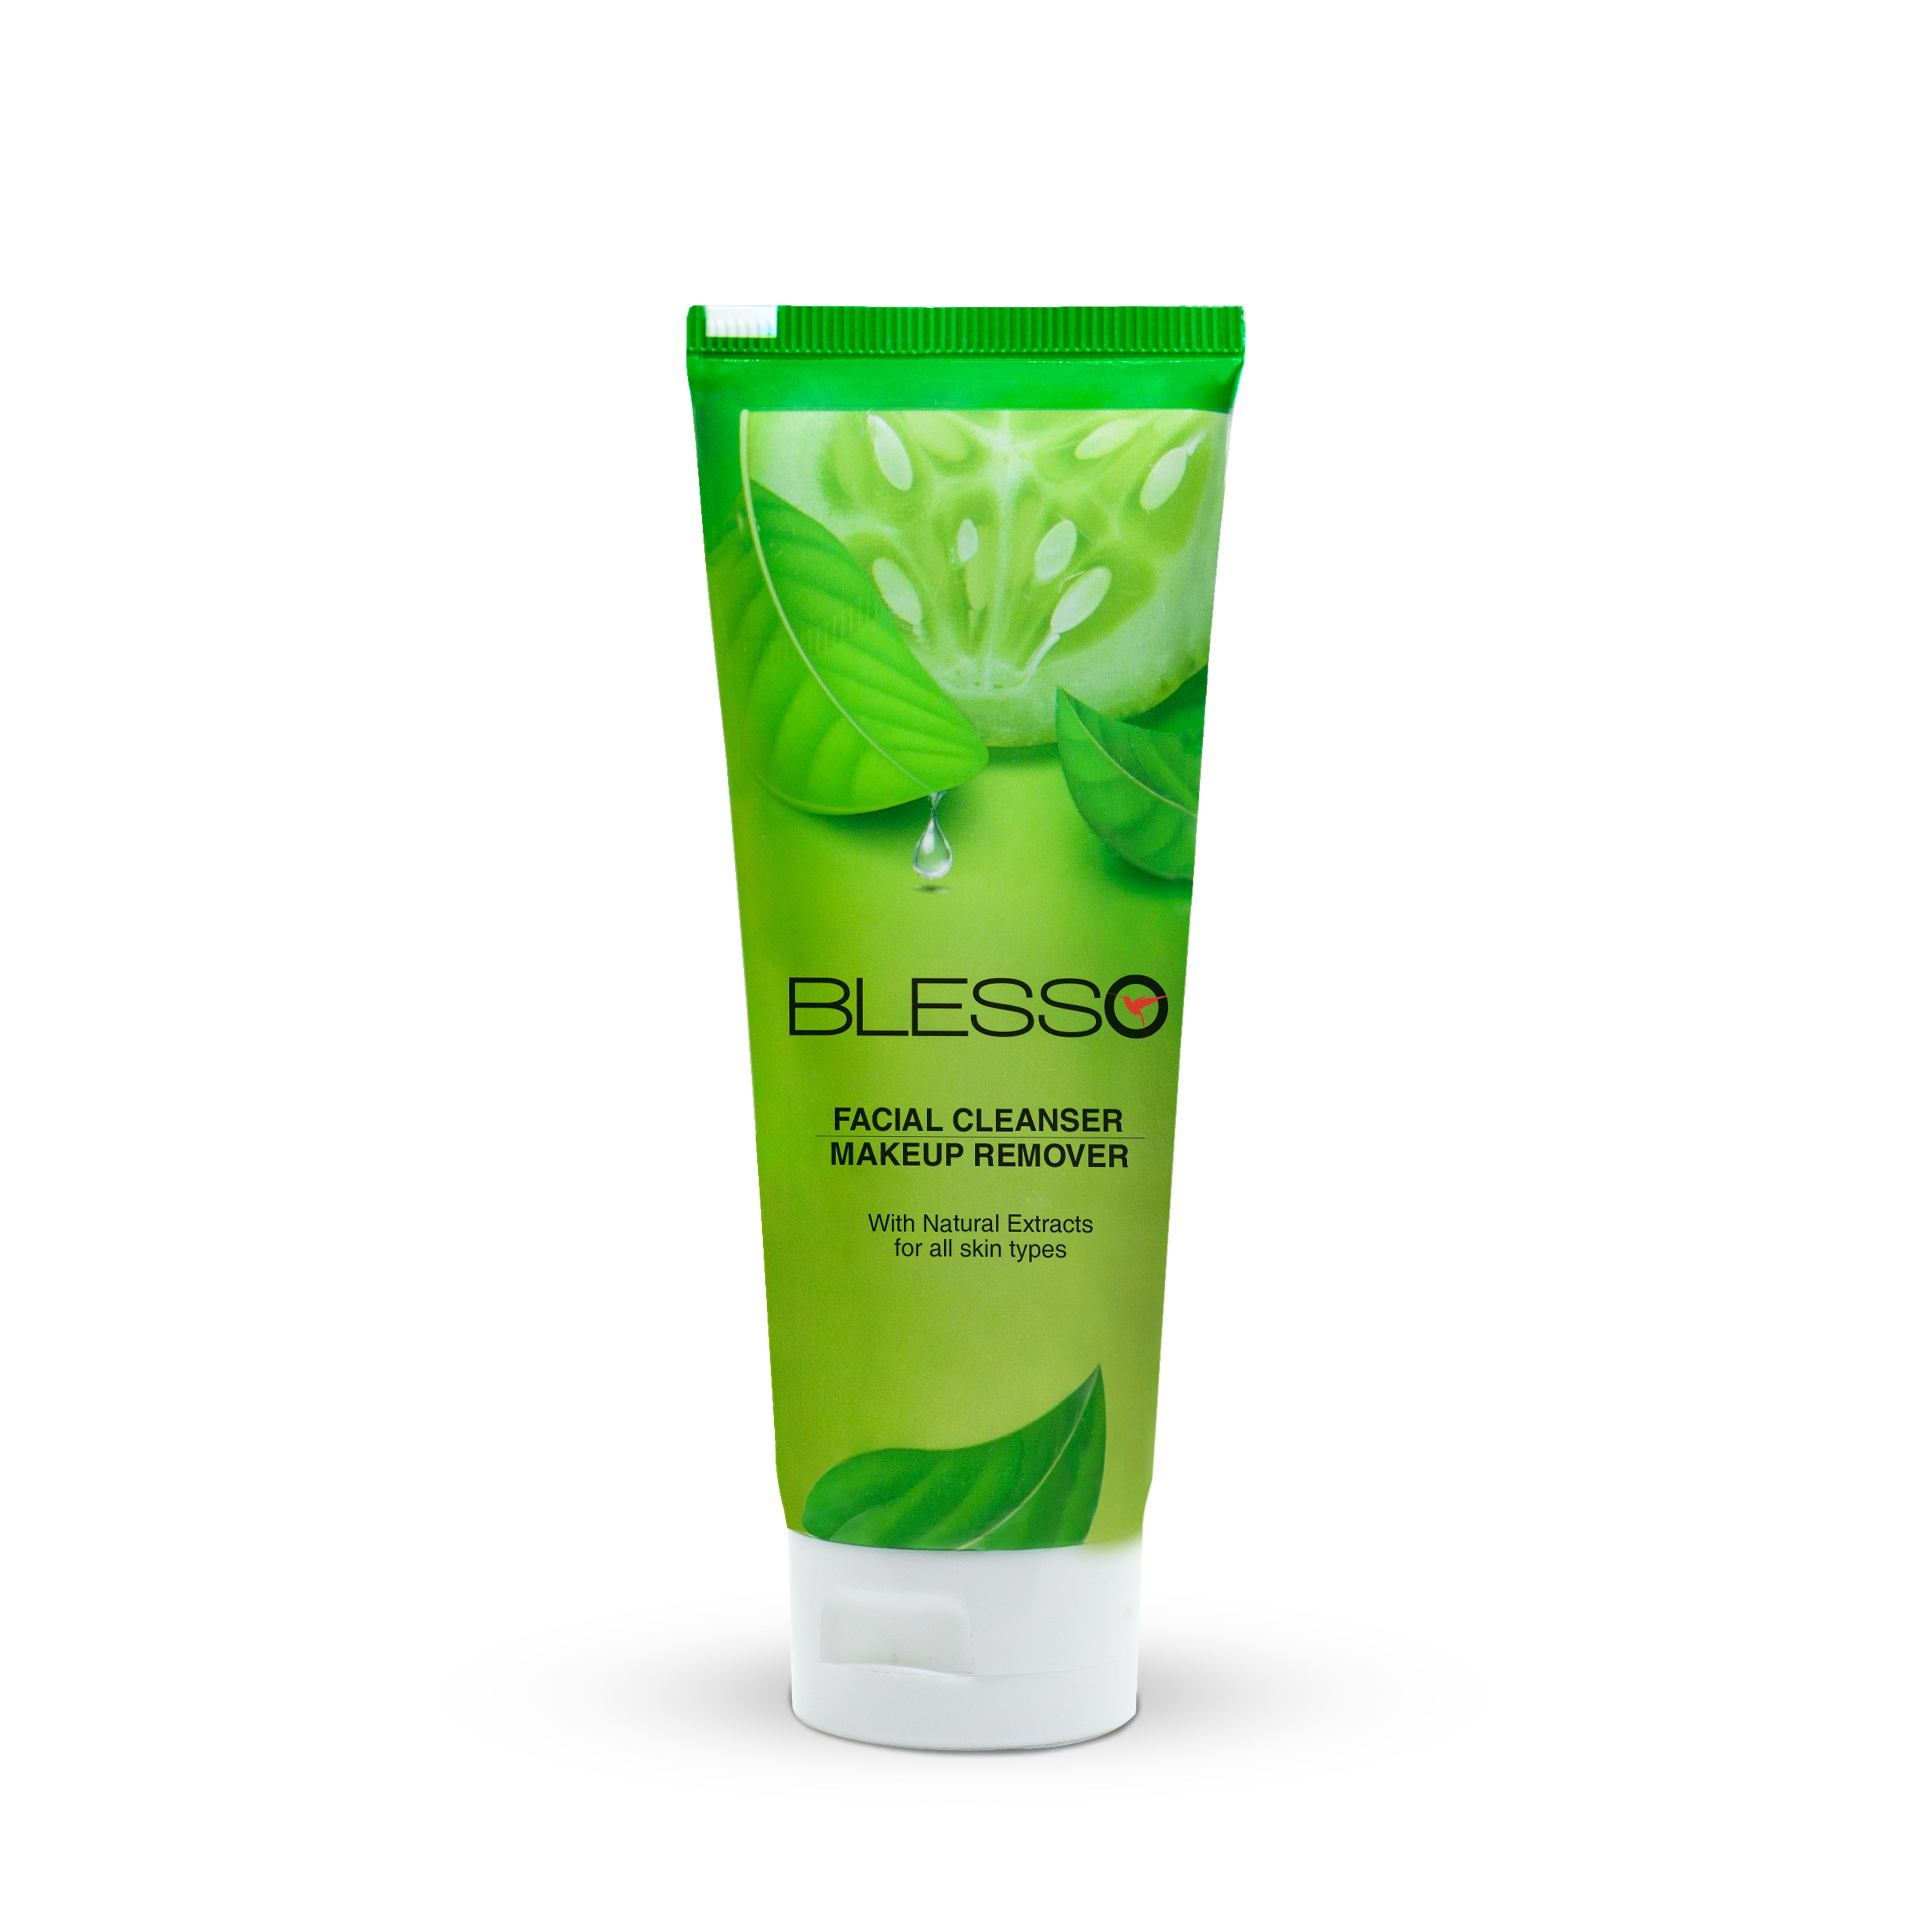 Blesso Facial Cleanser & Make Up Remover